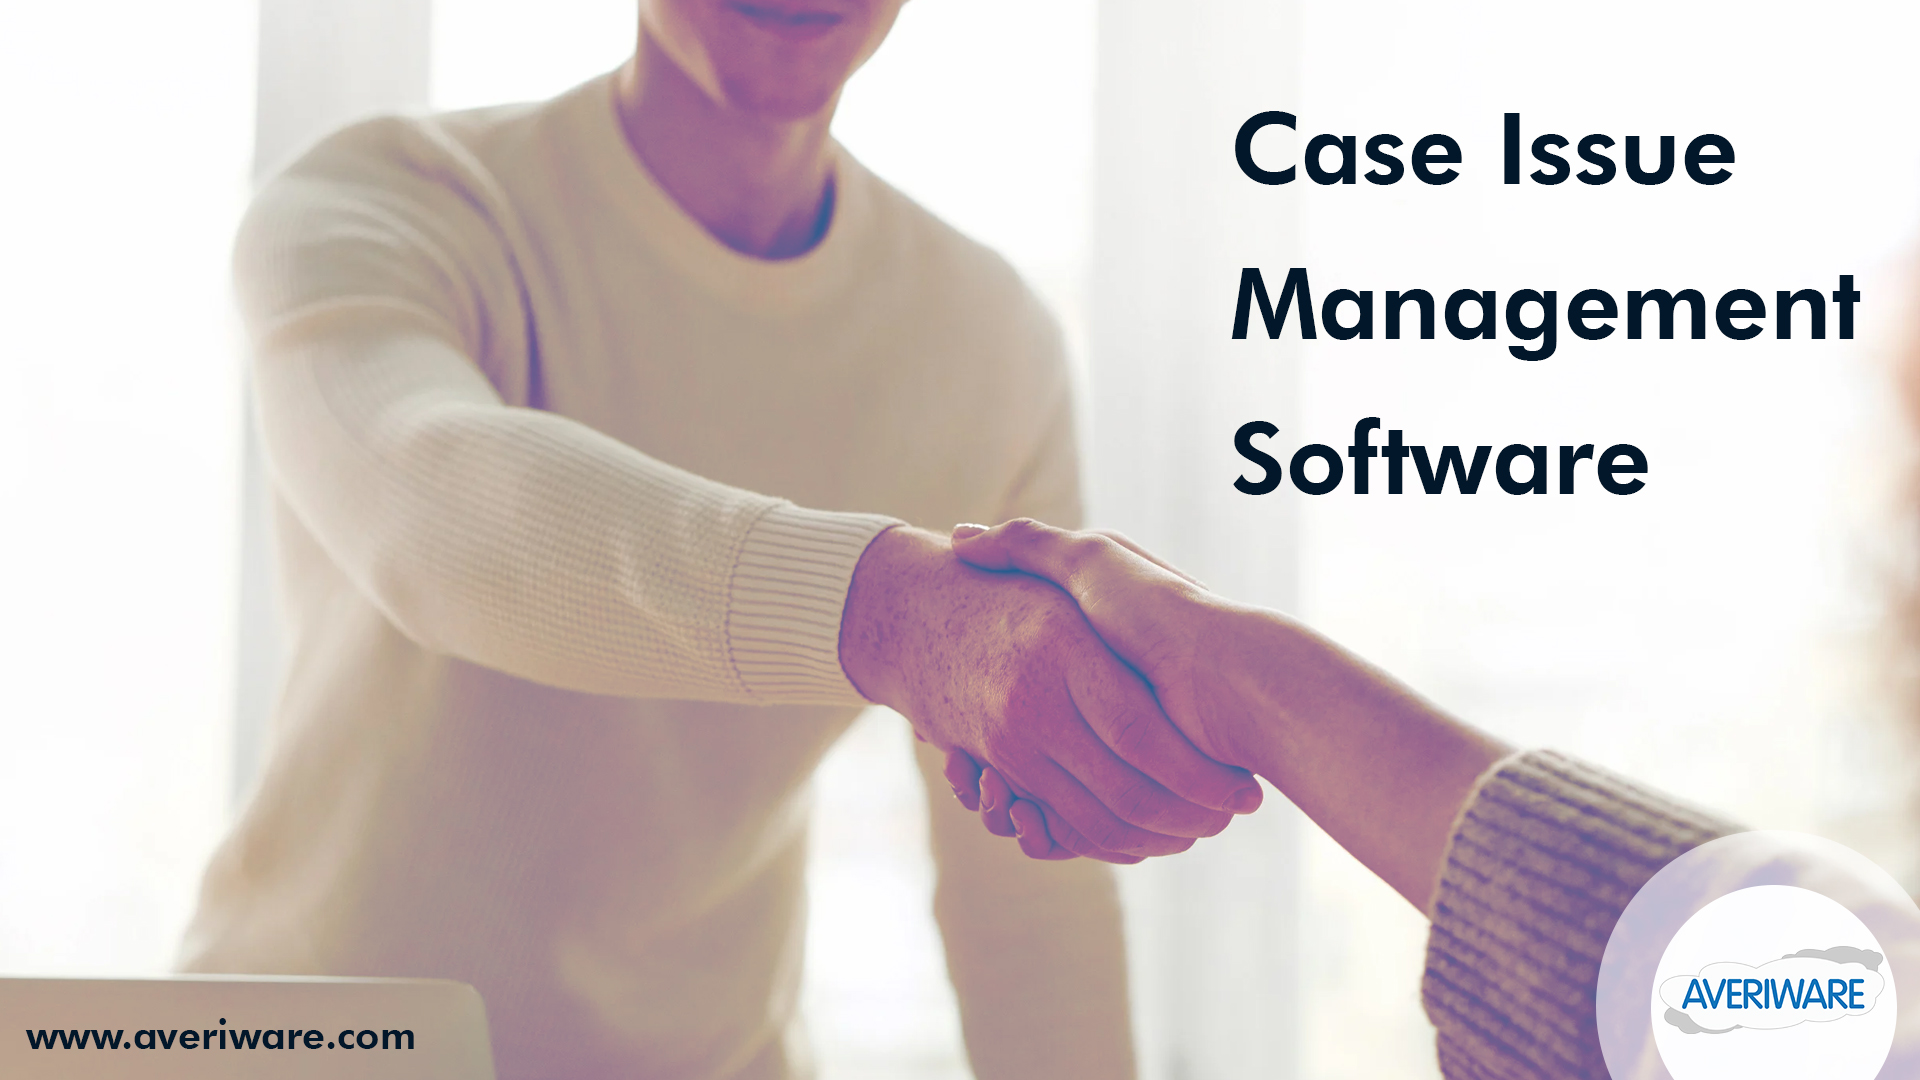 Seamless Service Reporting With Averiwares Case Issue Manag - California - Carlsbad ID1540519 1